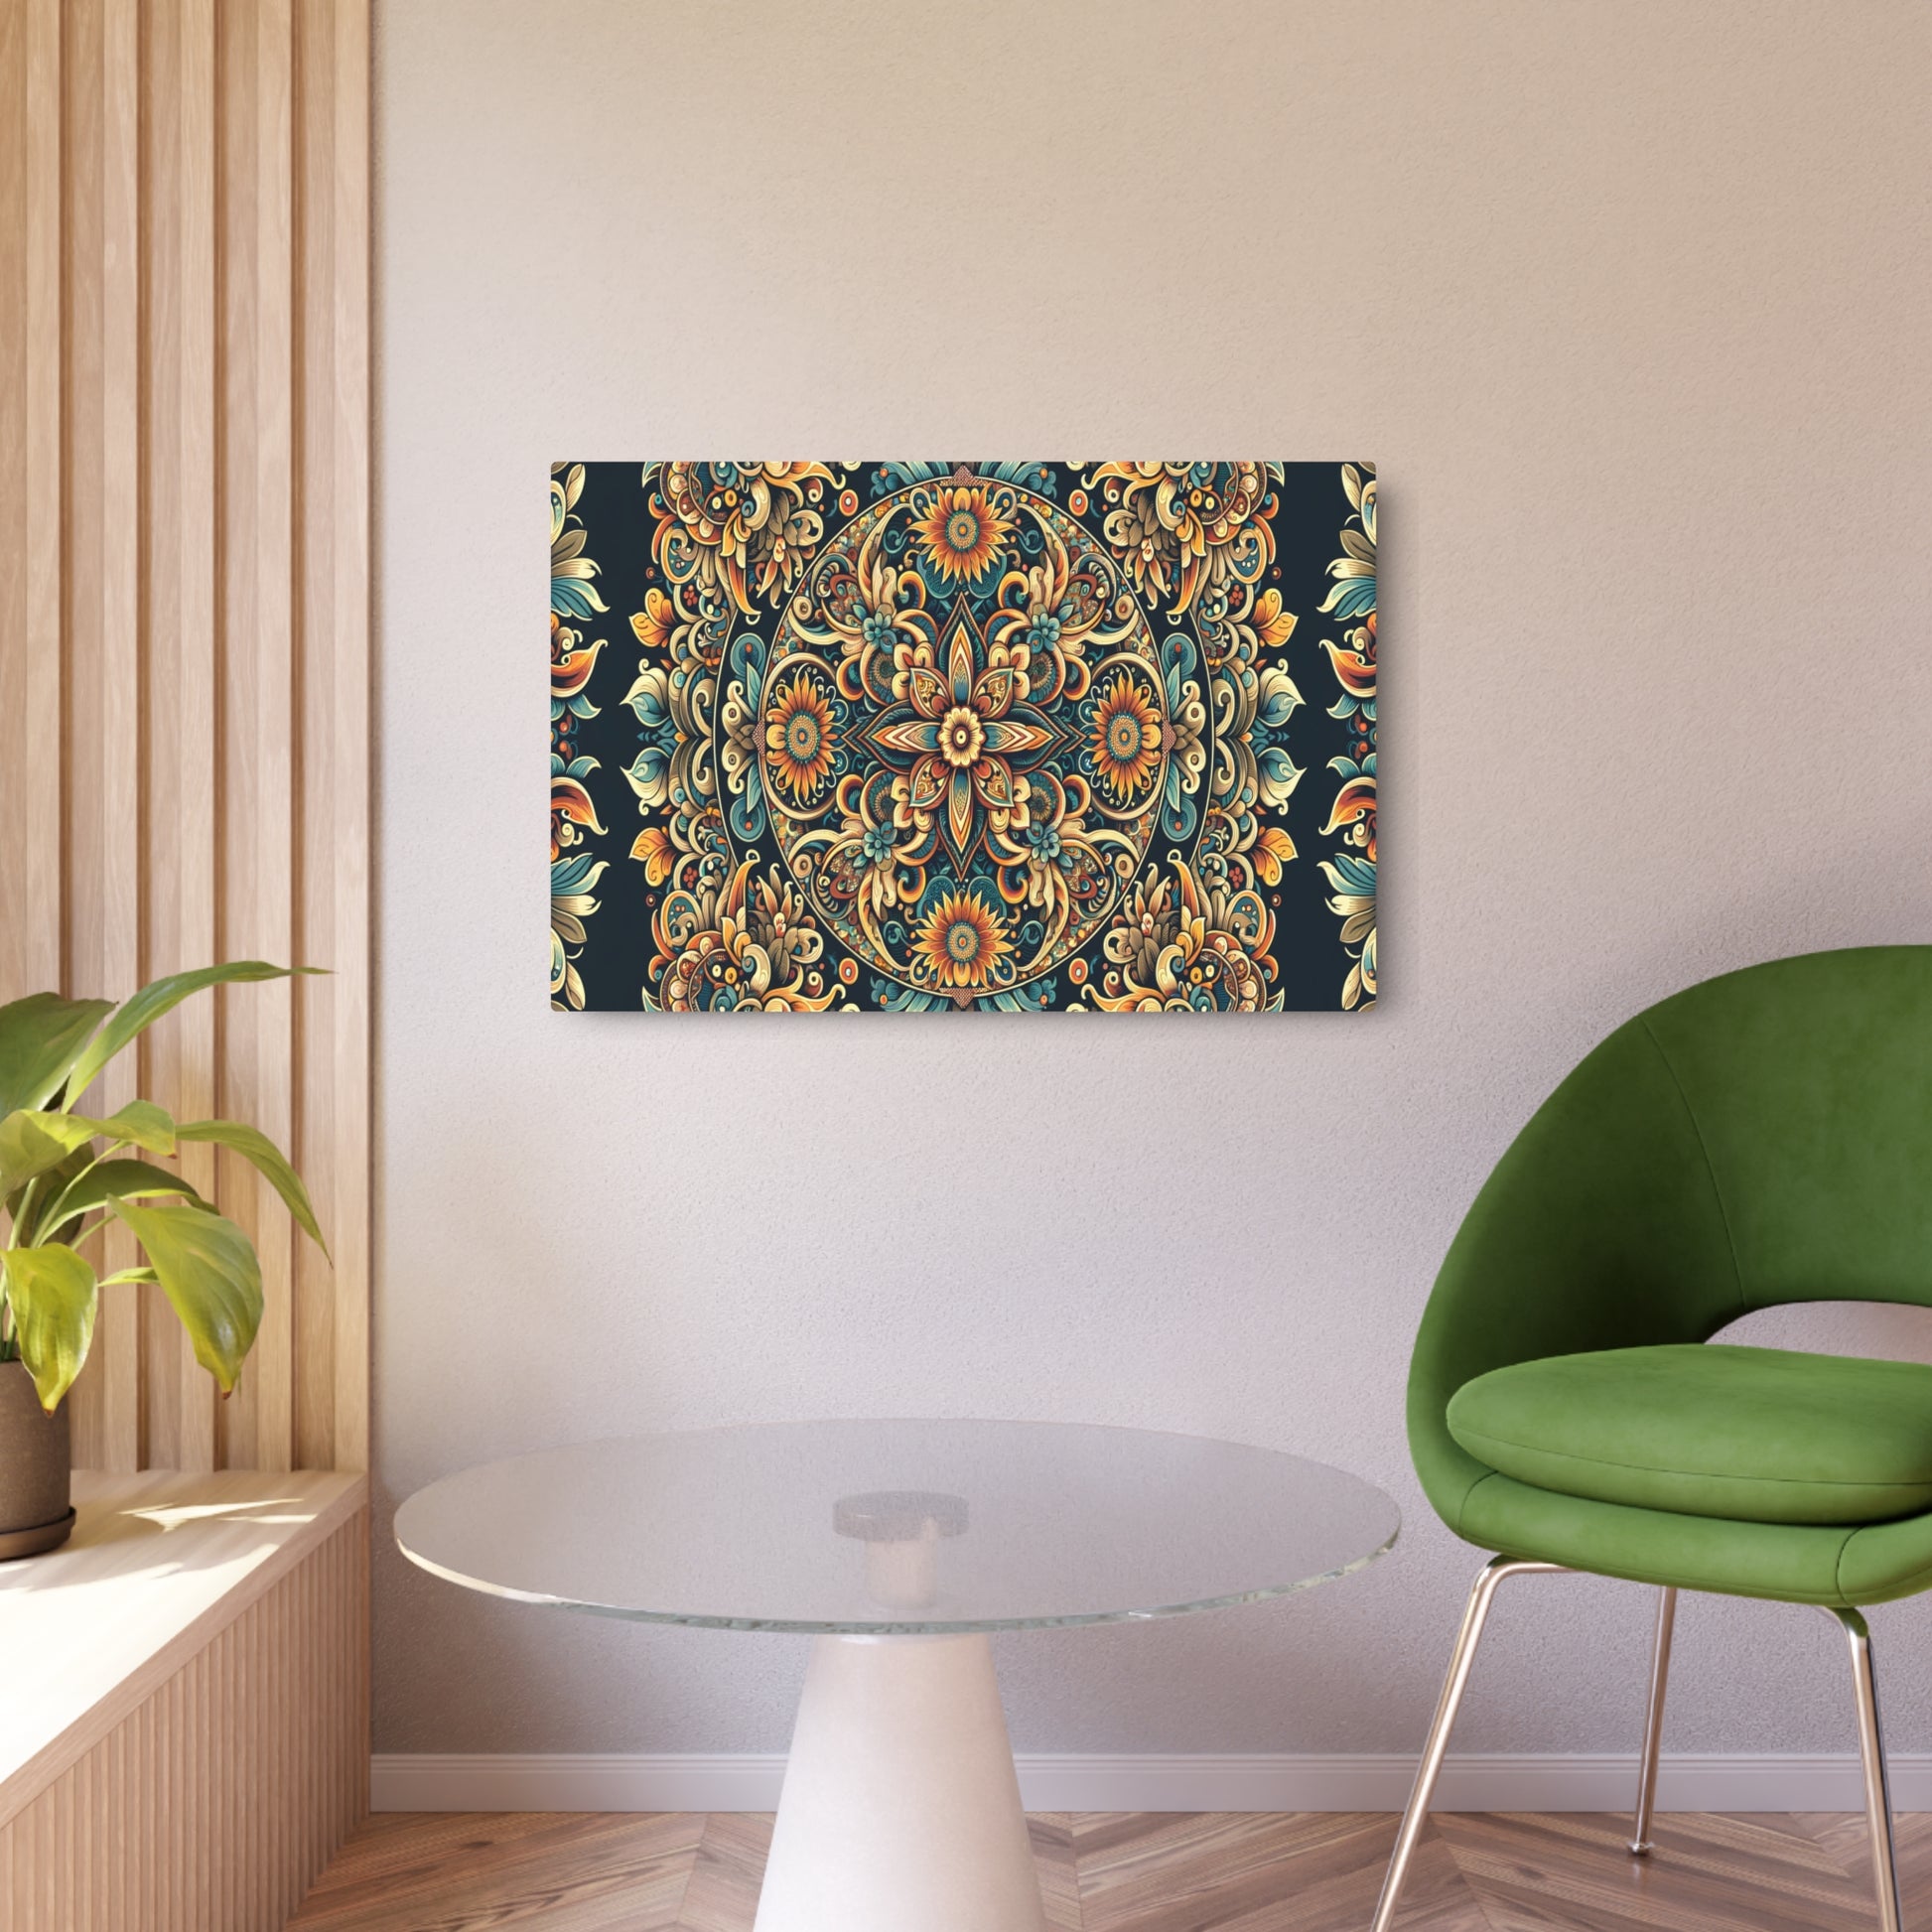 "Intricate Traditional Indonesian Batik Art Design - Authentic Non-Western Global Style" - Metal Poster Art 36″ x 24″ (Horizontal) 0.12''